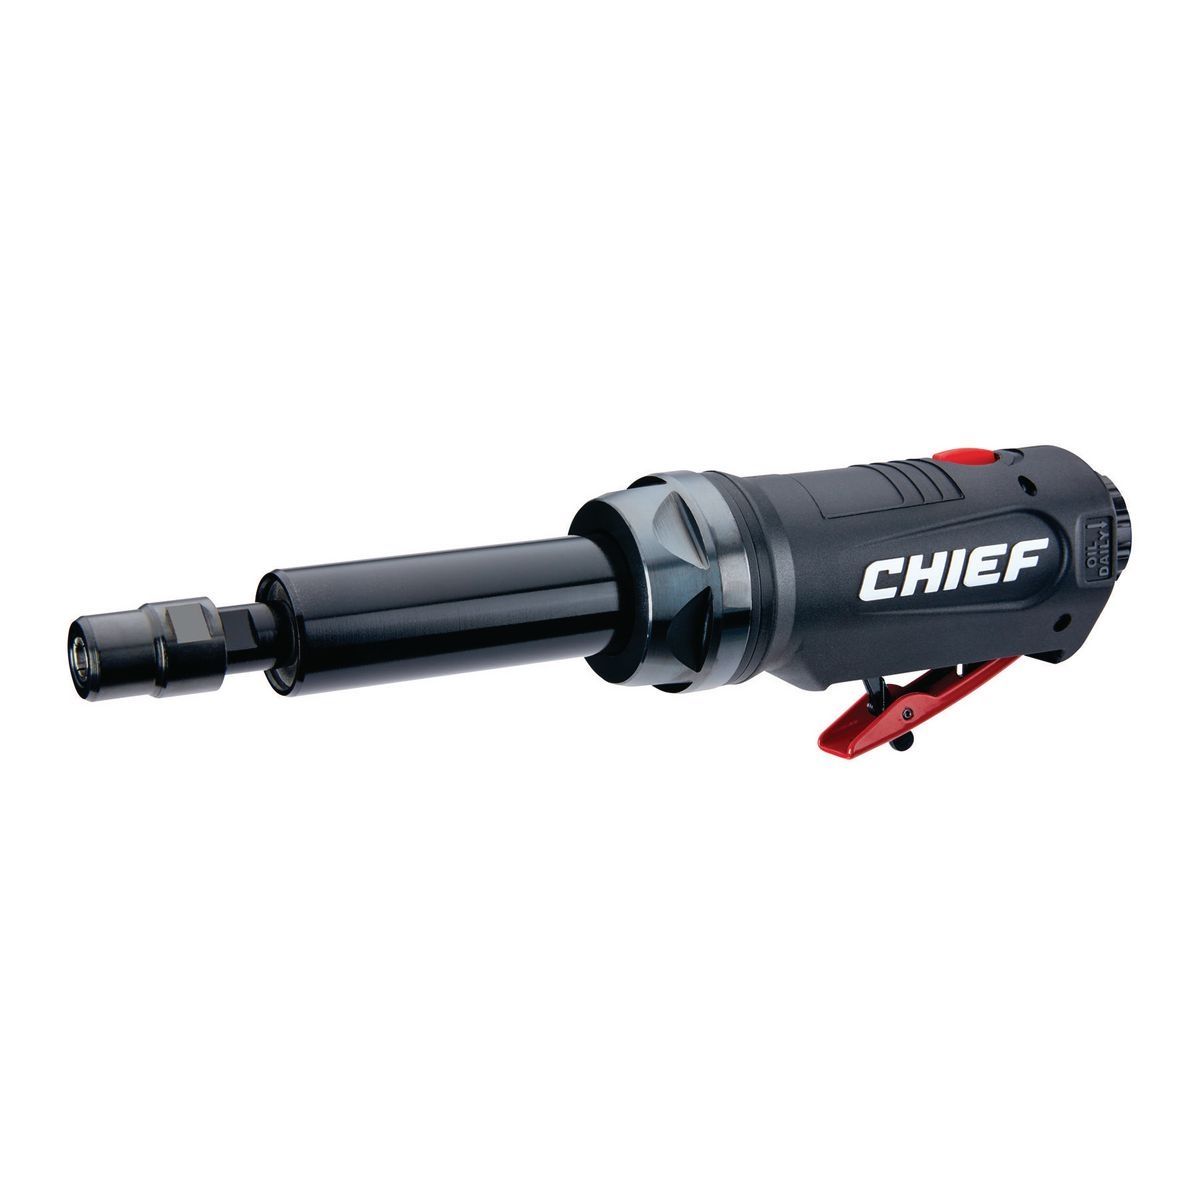 CHIEF Pneumatic 1/4 In. Professional Die Grinder with 4 In. Extension